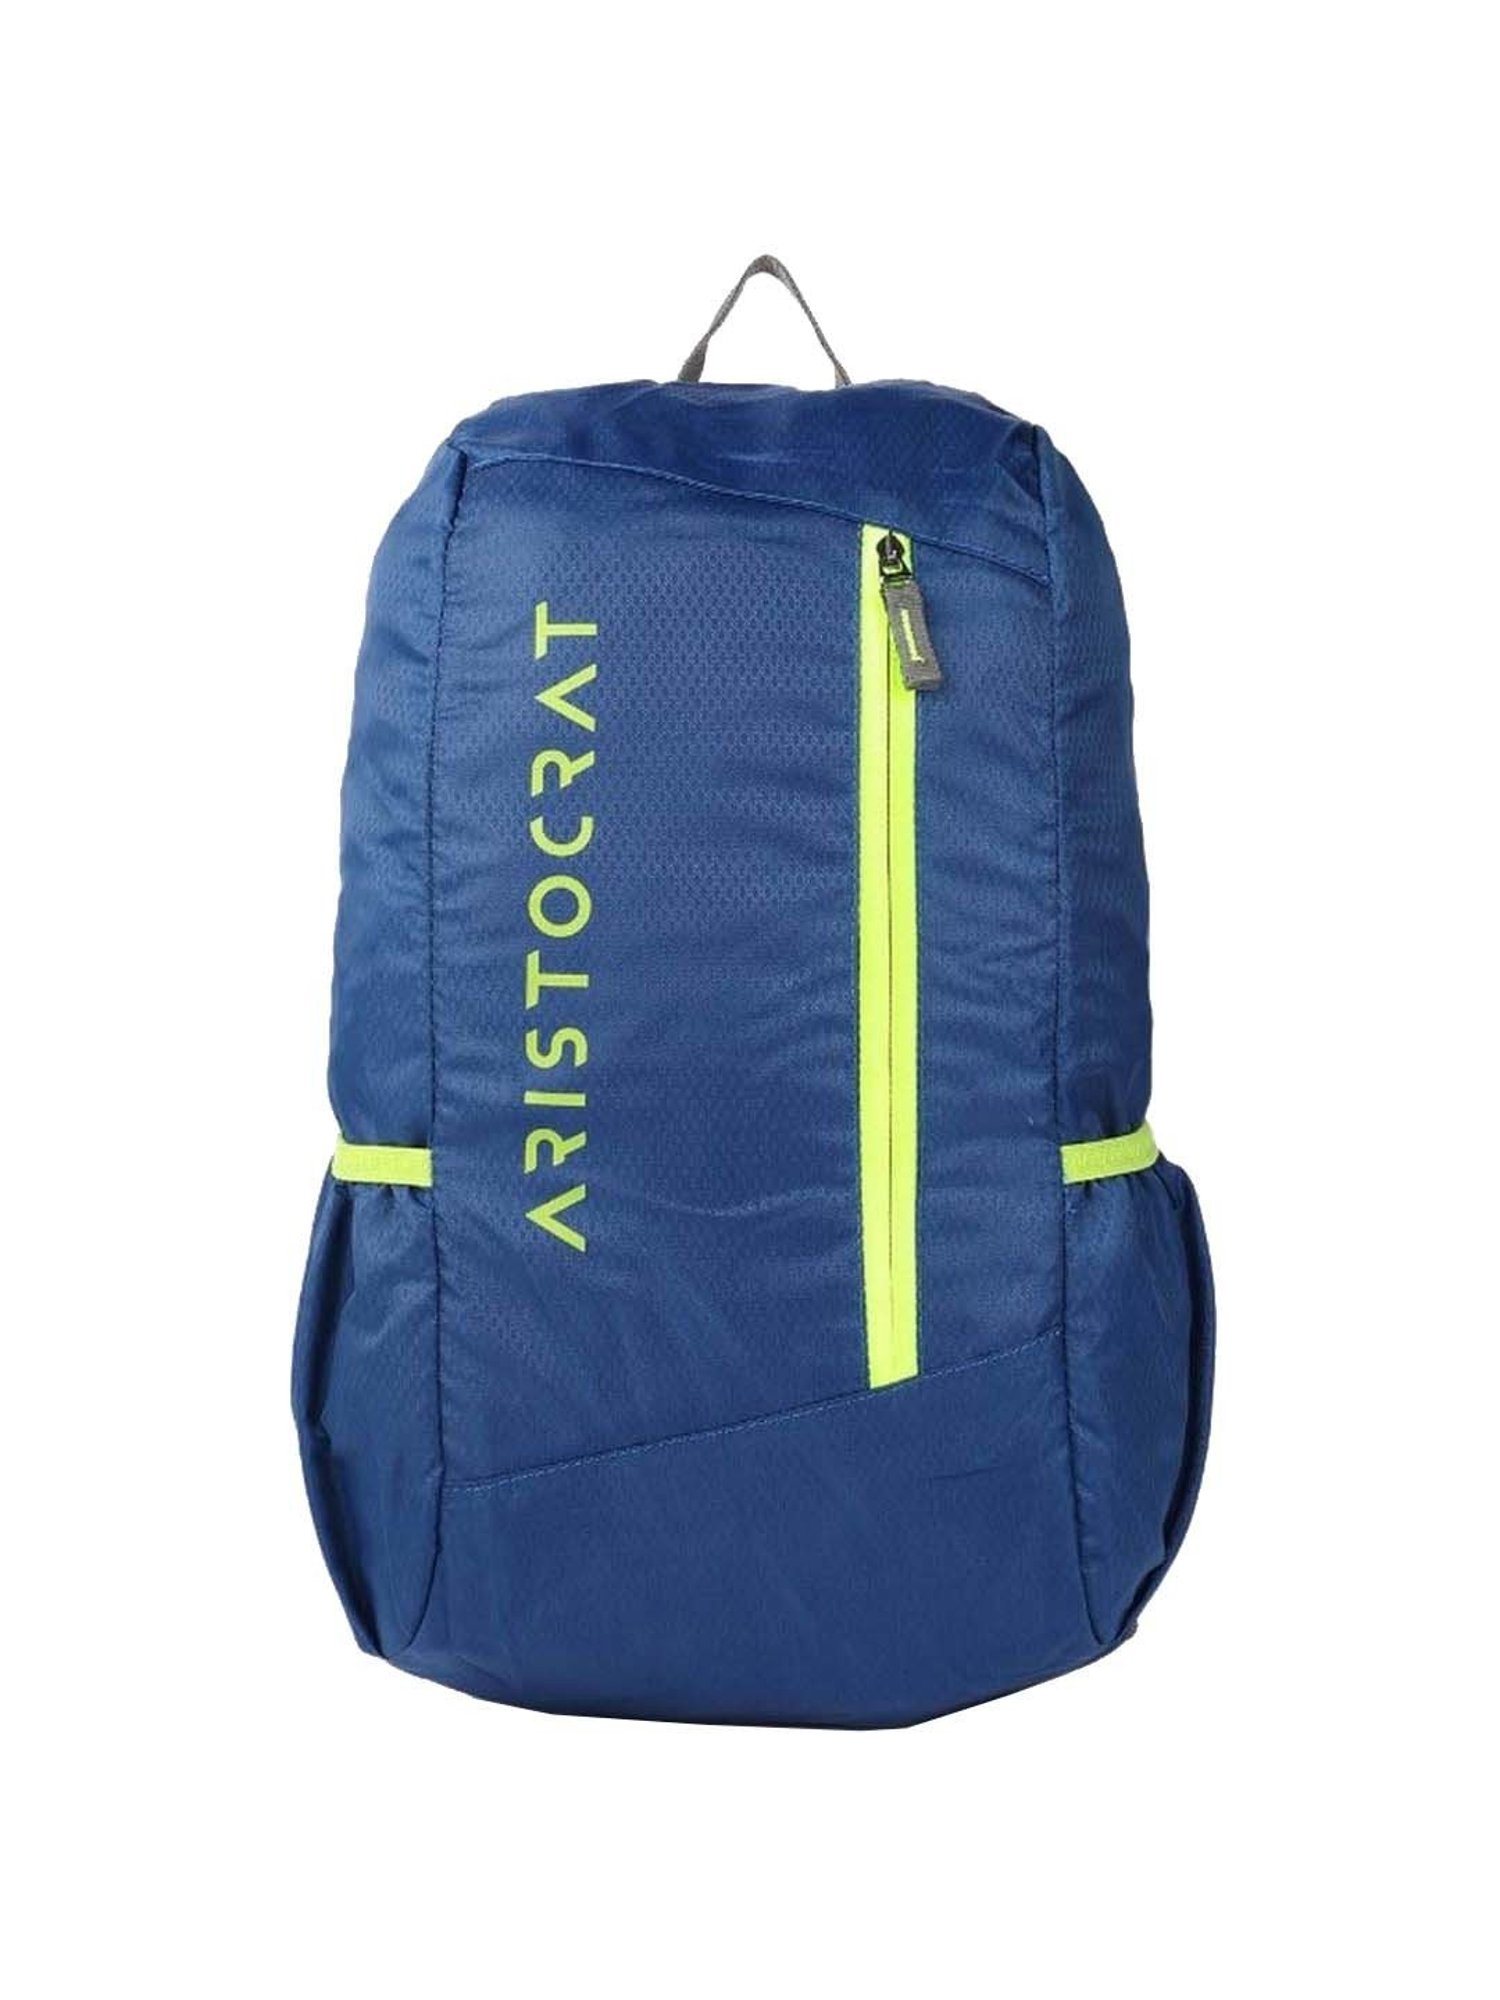 Aristocrat Backpack Review #bags #schoolbags #backpacks - YouTube